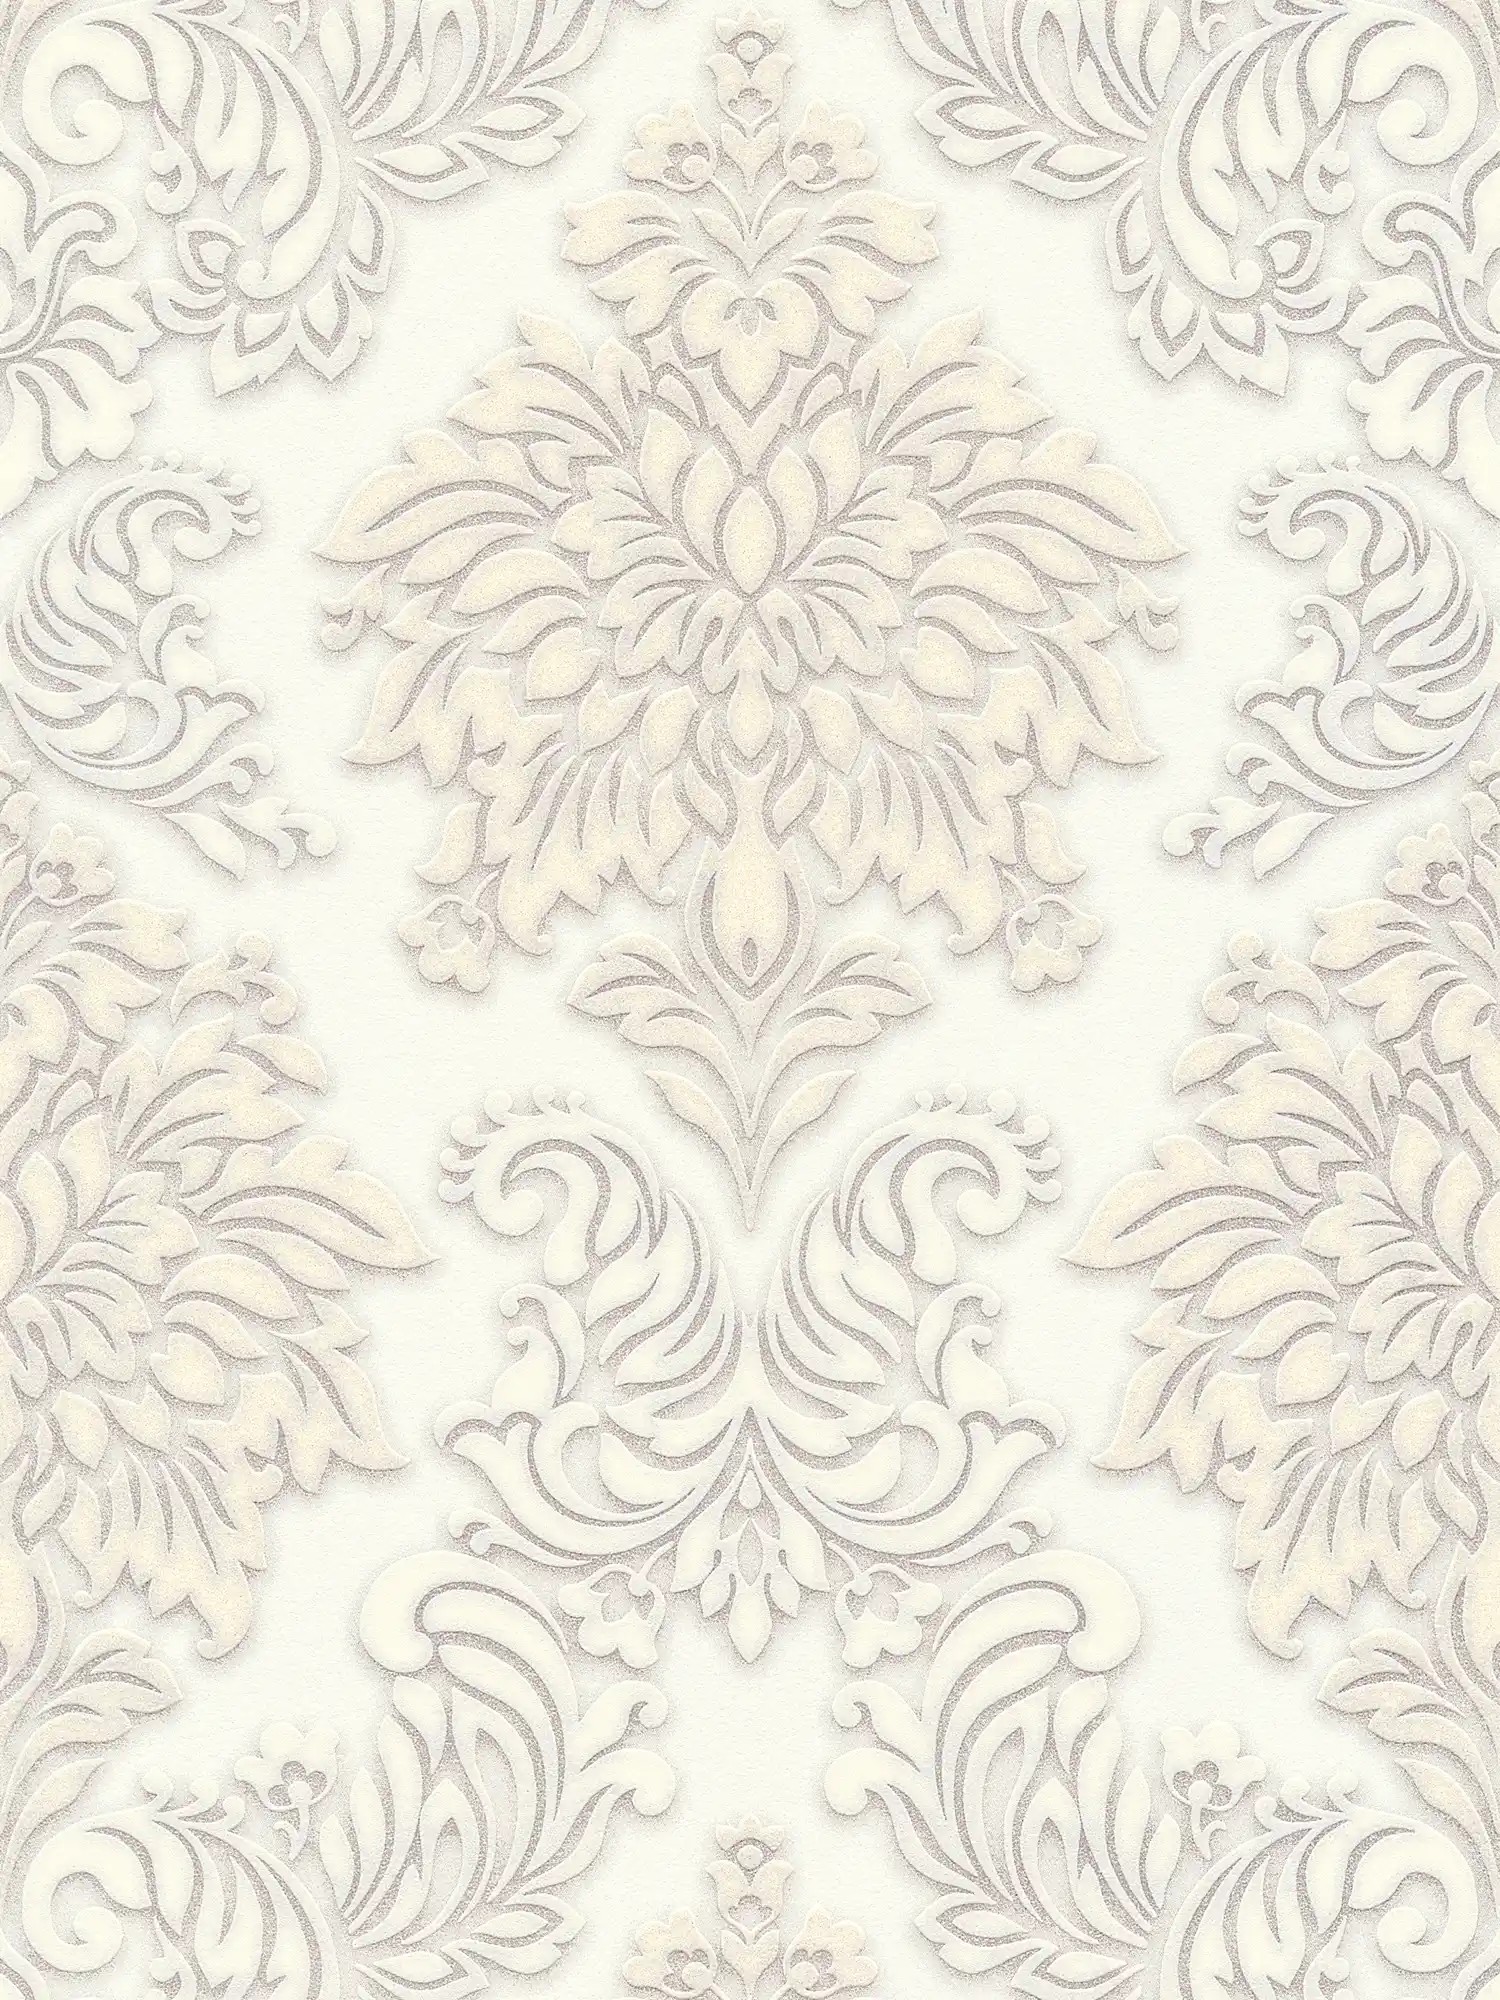 Baroque wallpaper ornaments with glitter effect - white, silver, beige
